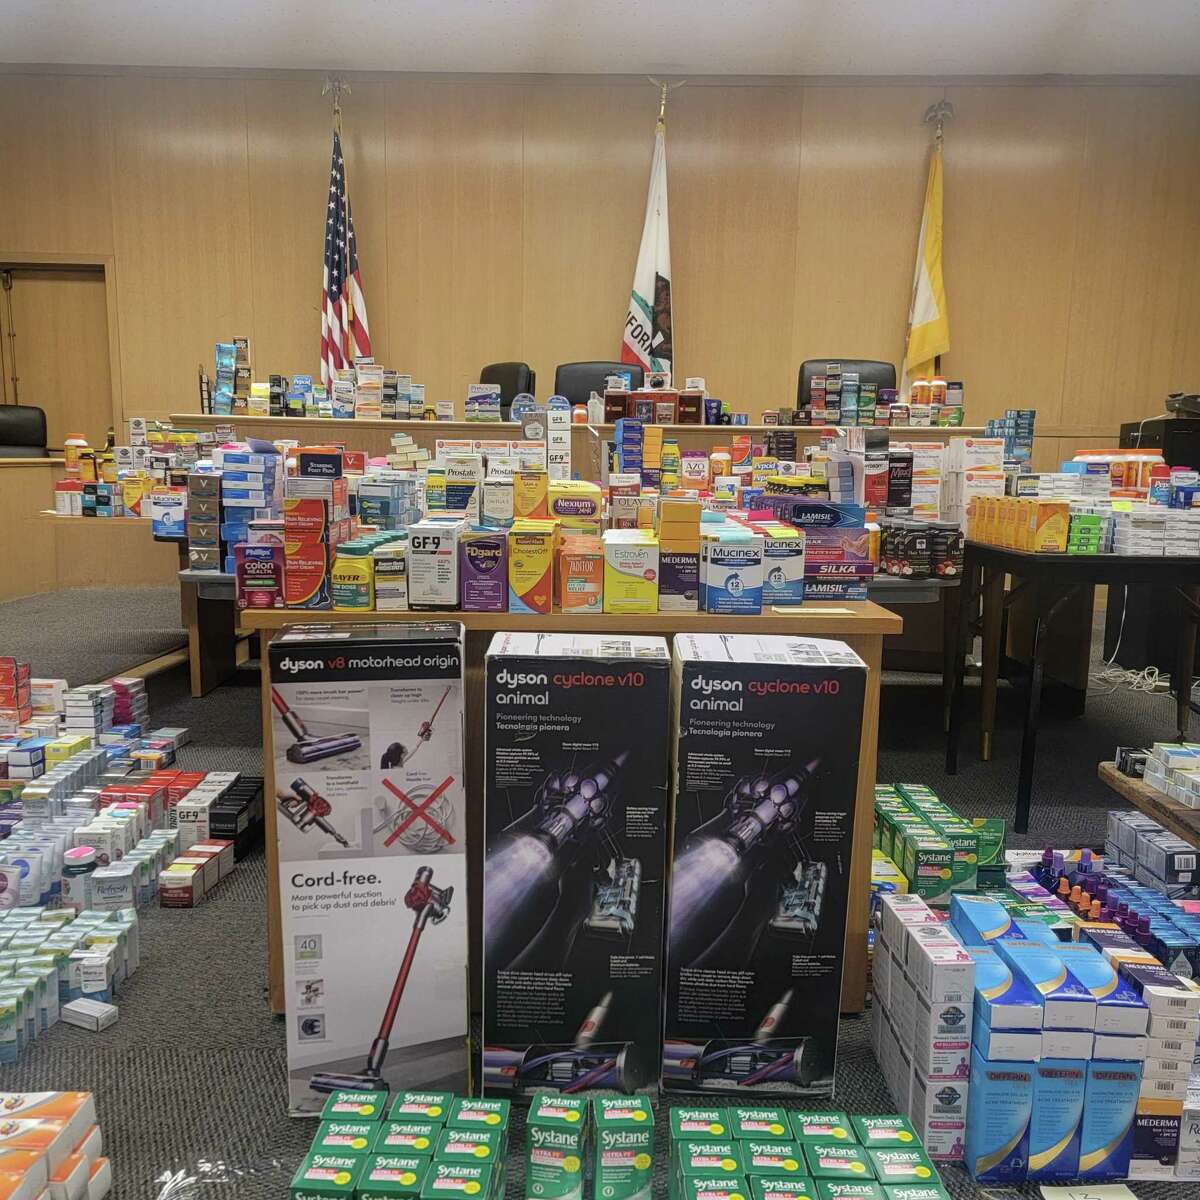 San Francisco police say they seized more than $200,000 worth of stolen goods from a home.